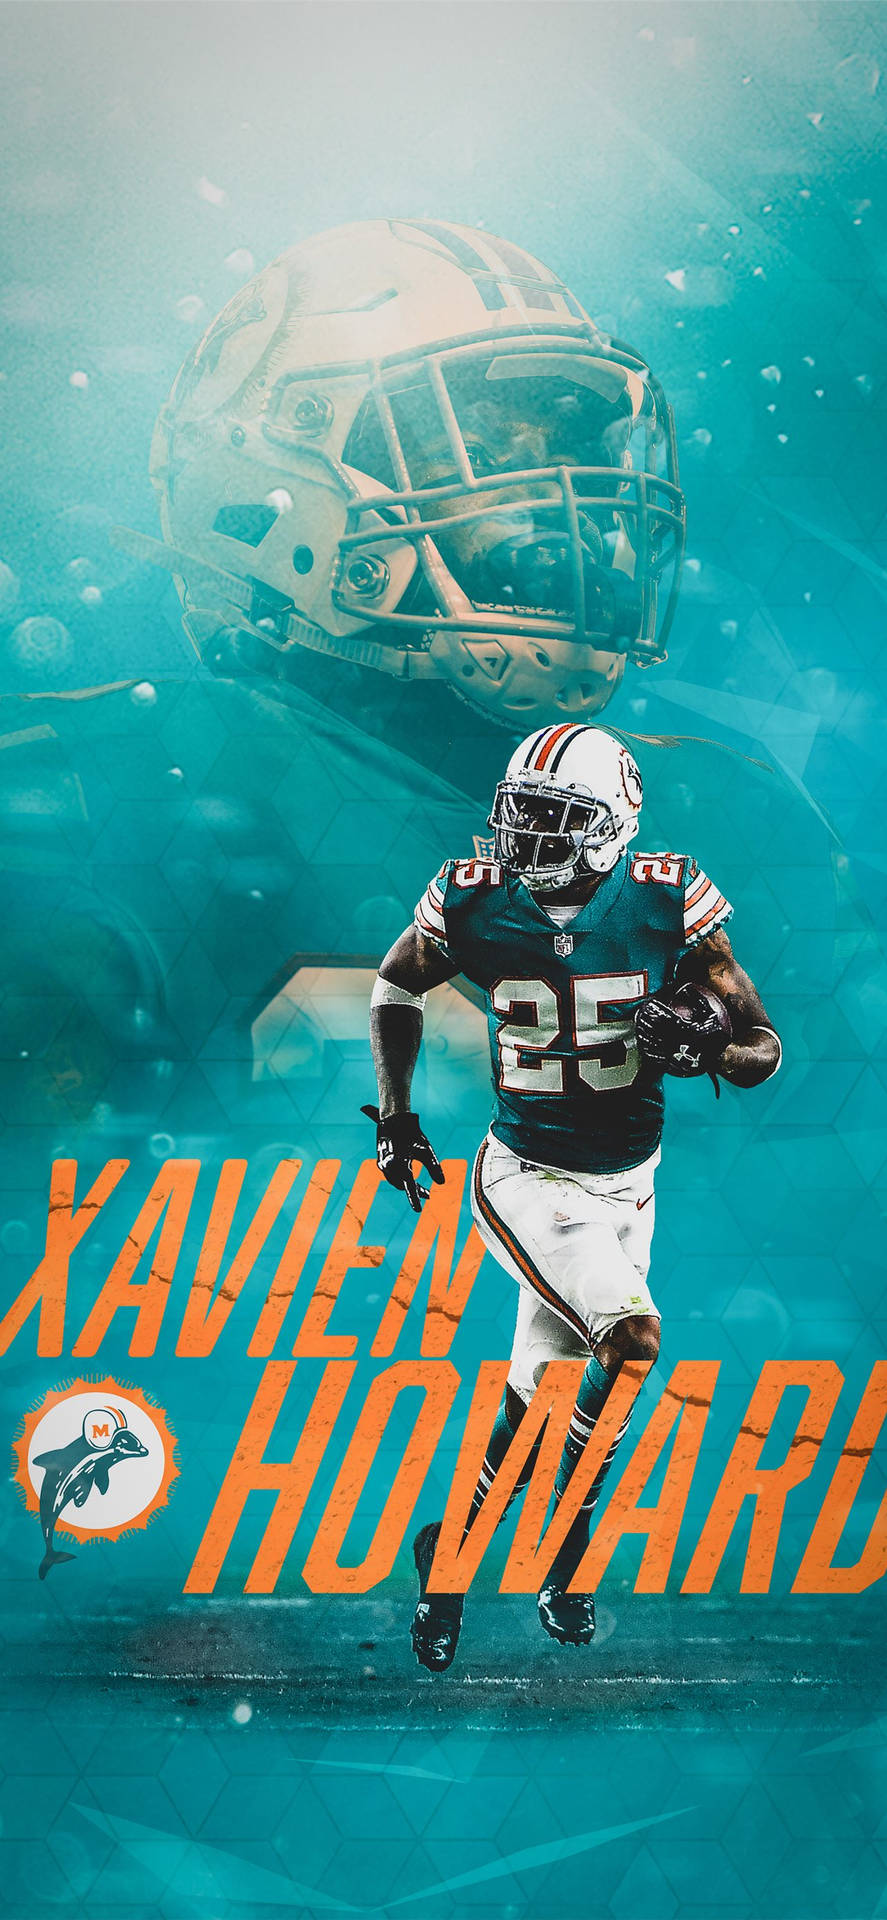 An awesome wallpaper of a Miami Dolphins-themed iPhone Wallpaper